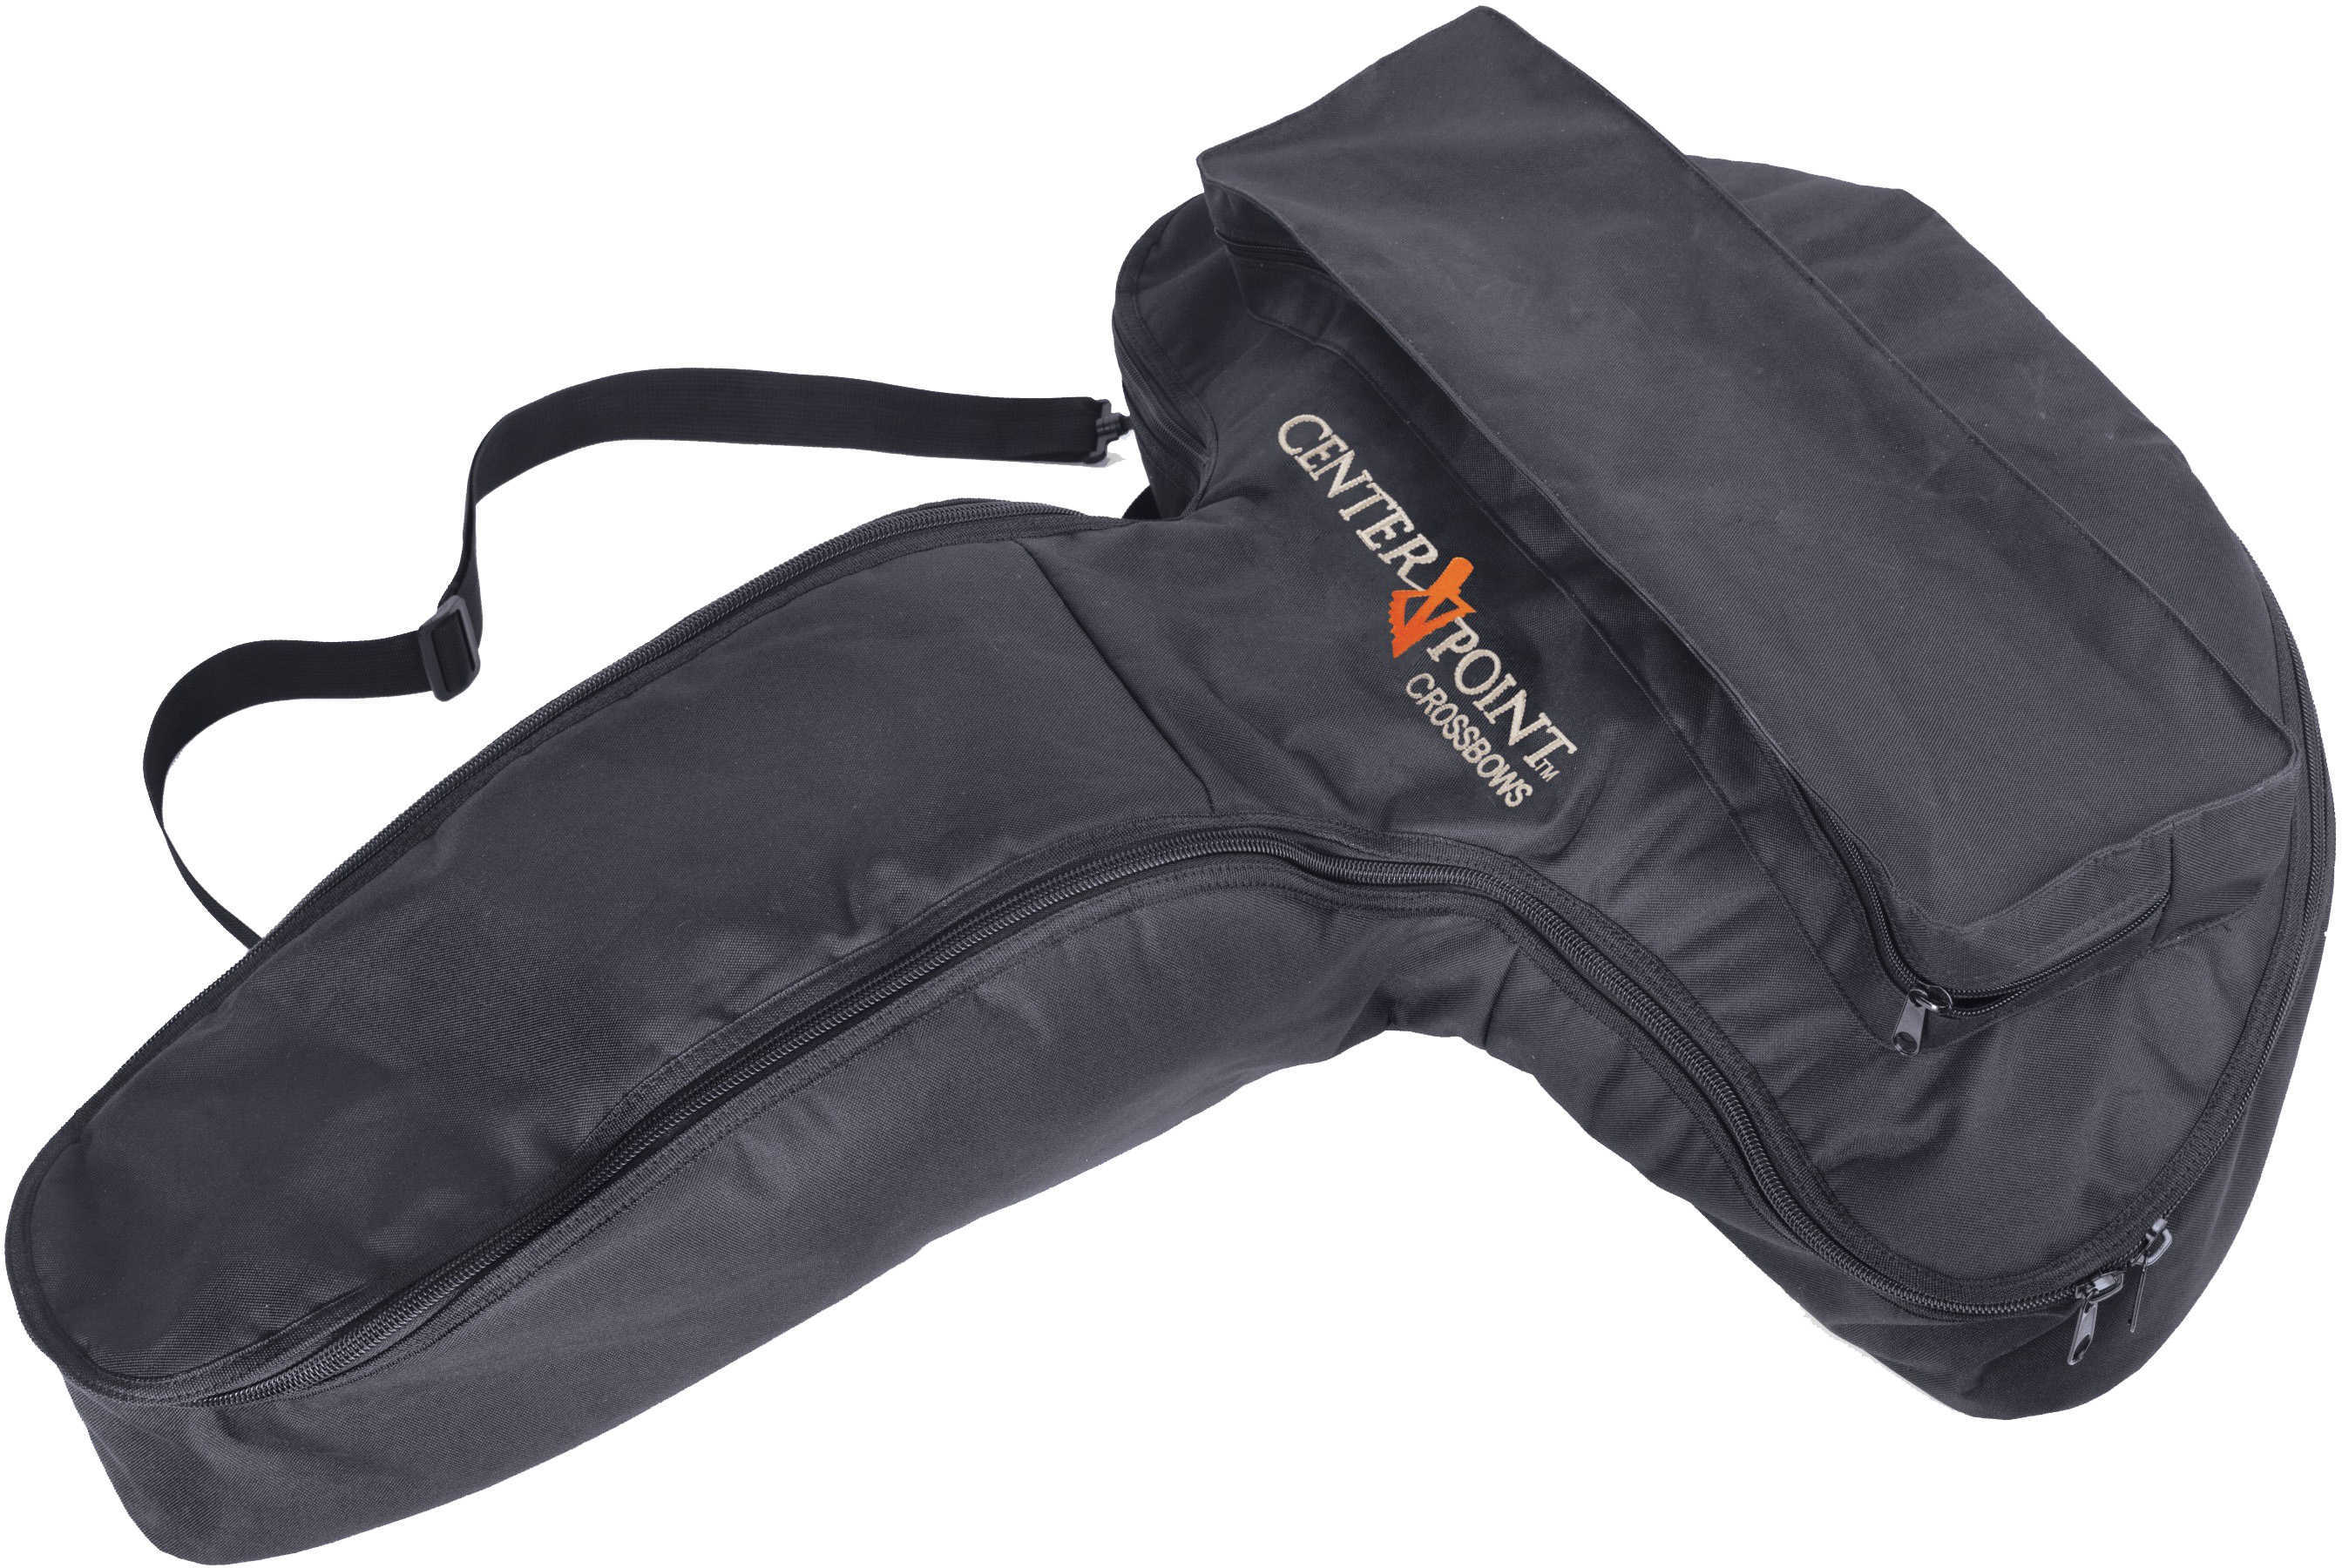 CenterPoint Crossbow Padded Soft Bag, Black Md: AXCSBG